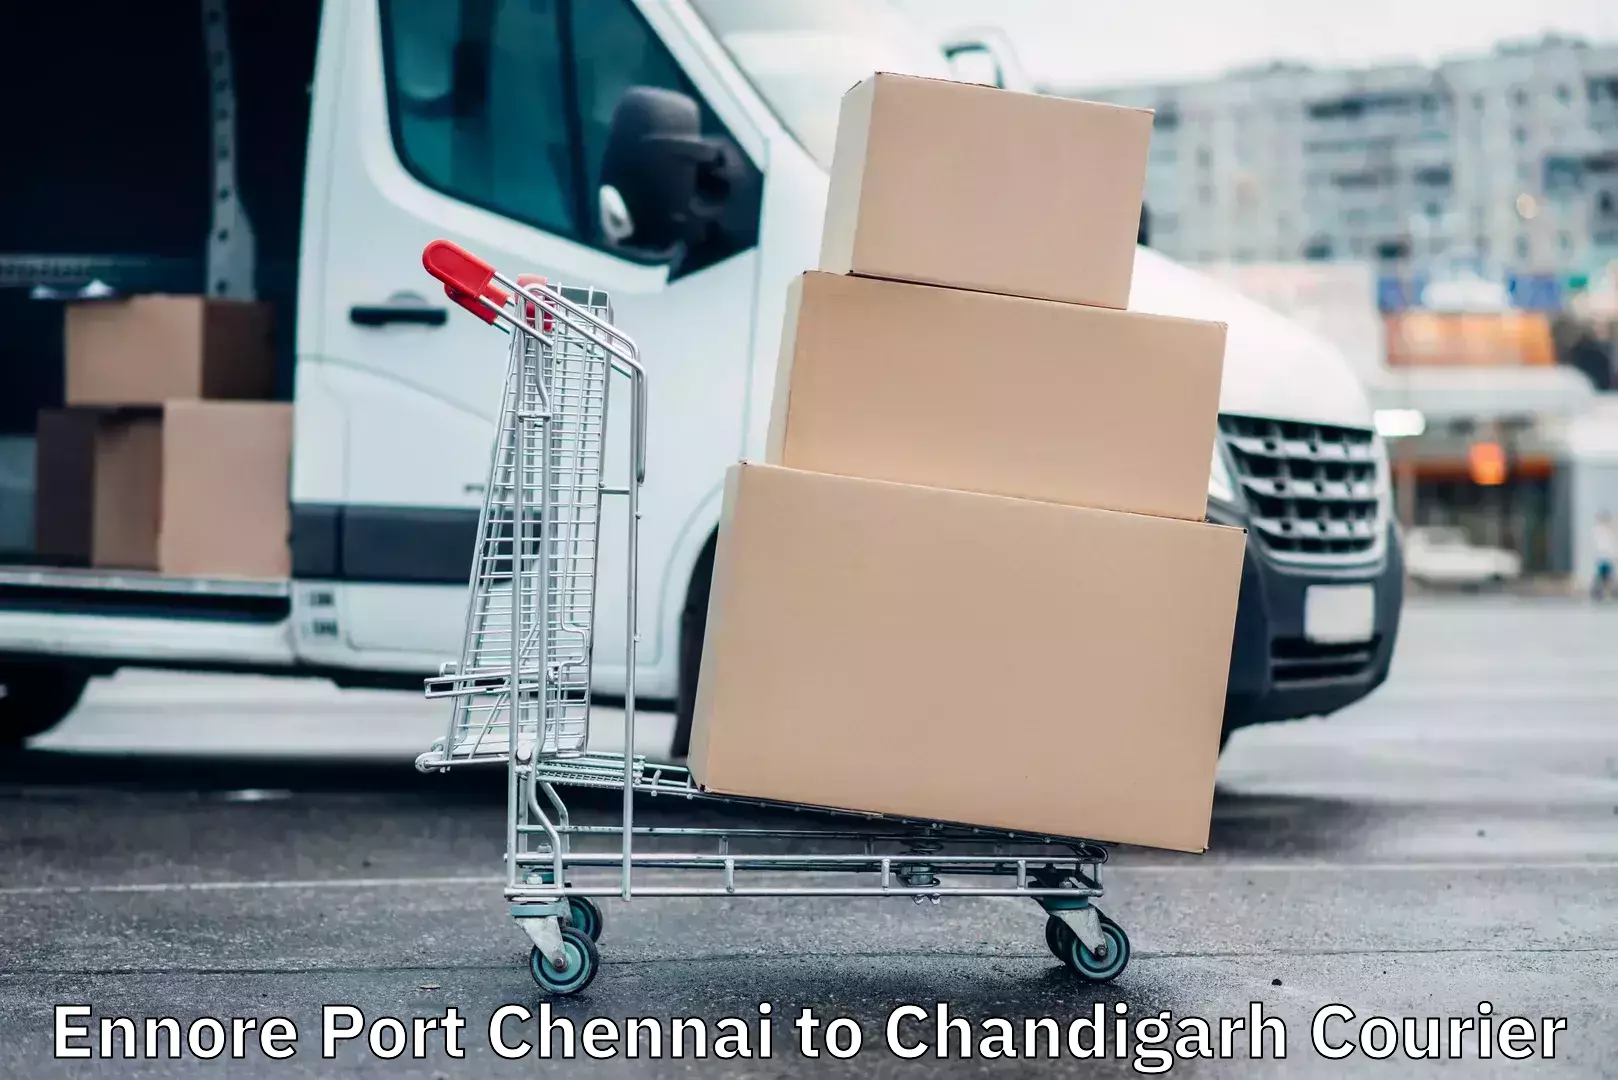 Express shipping Ennore Port Chennai to Chandigarh